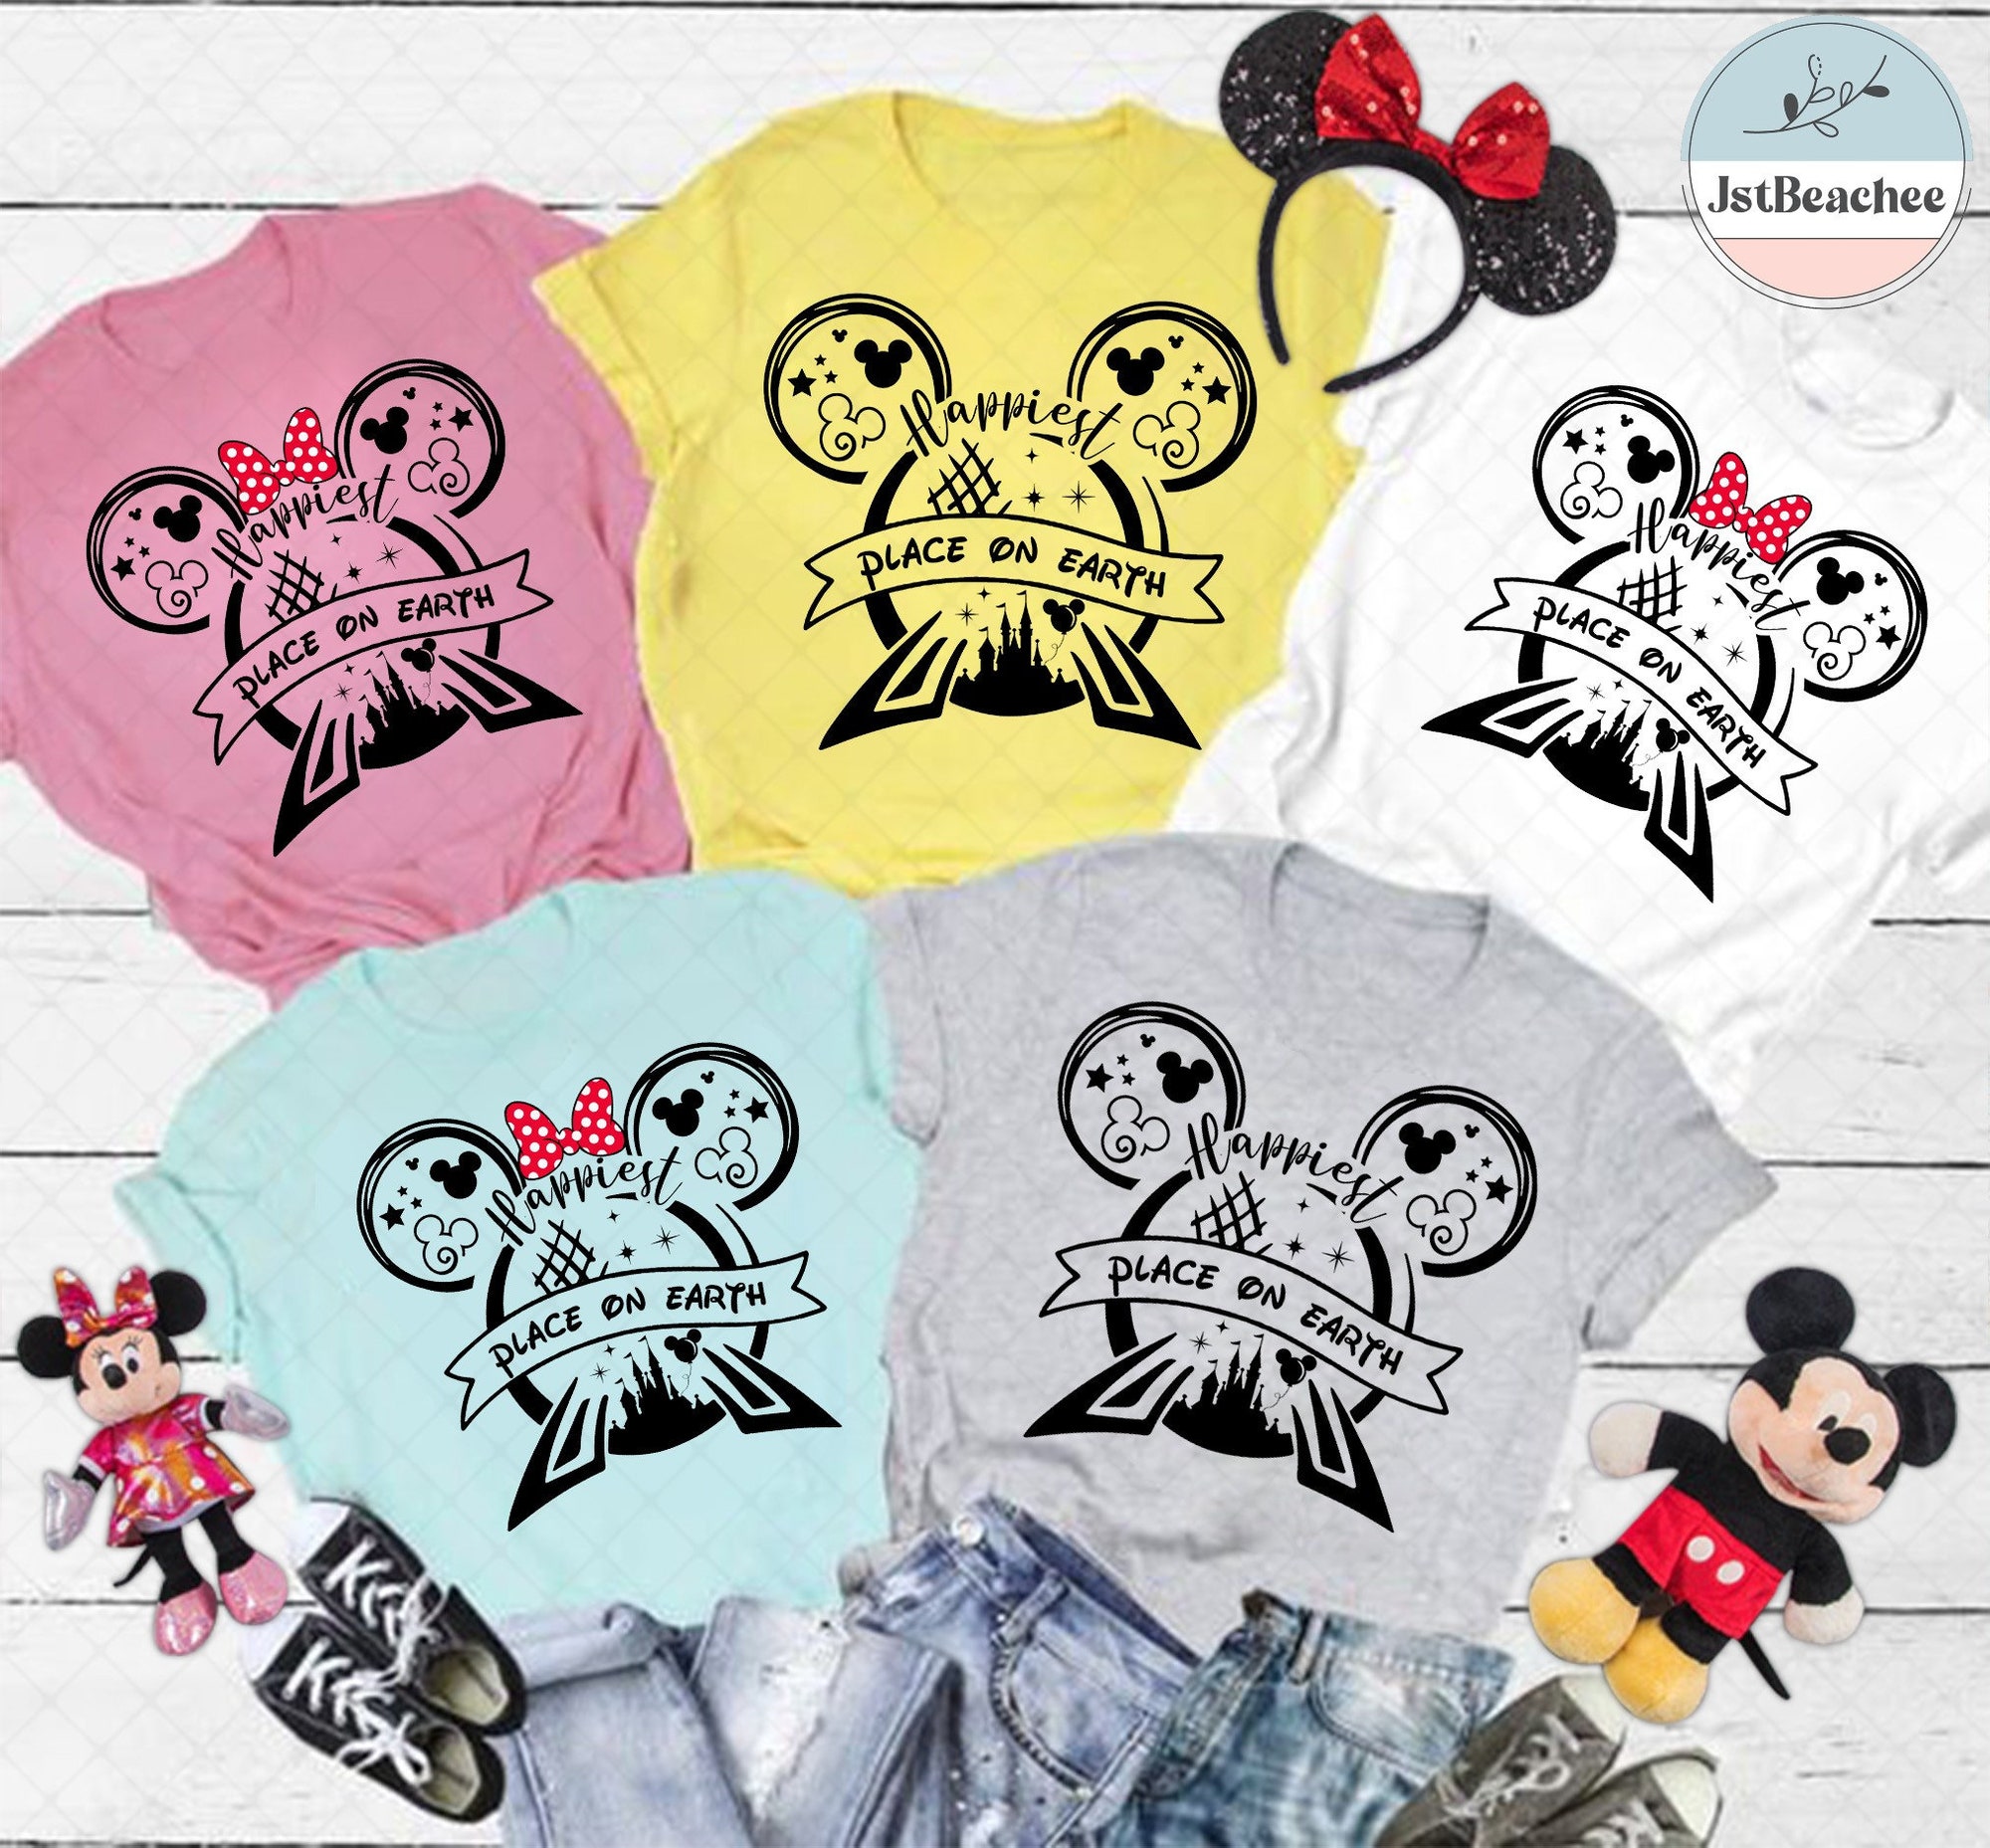 Happiest Place On Earth shirts, Disney Epcot shirts, Disneyworld Shirts Family, Disney Vacation shirts